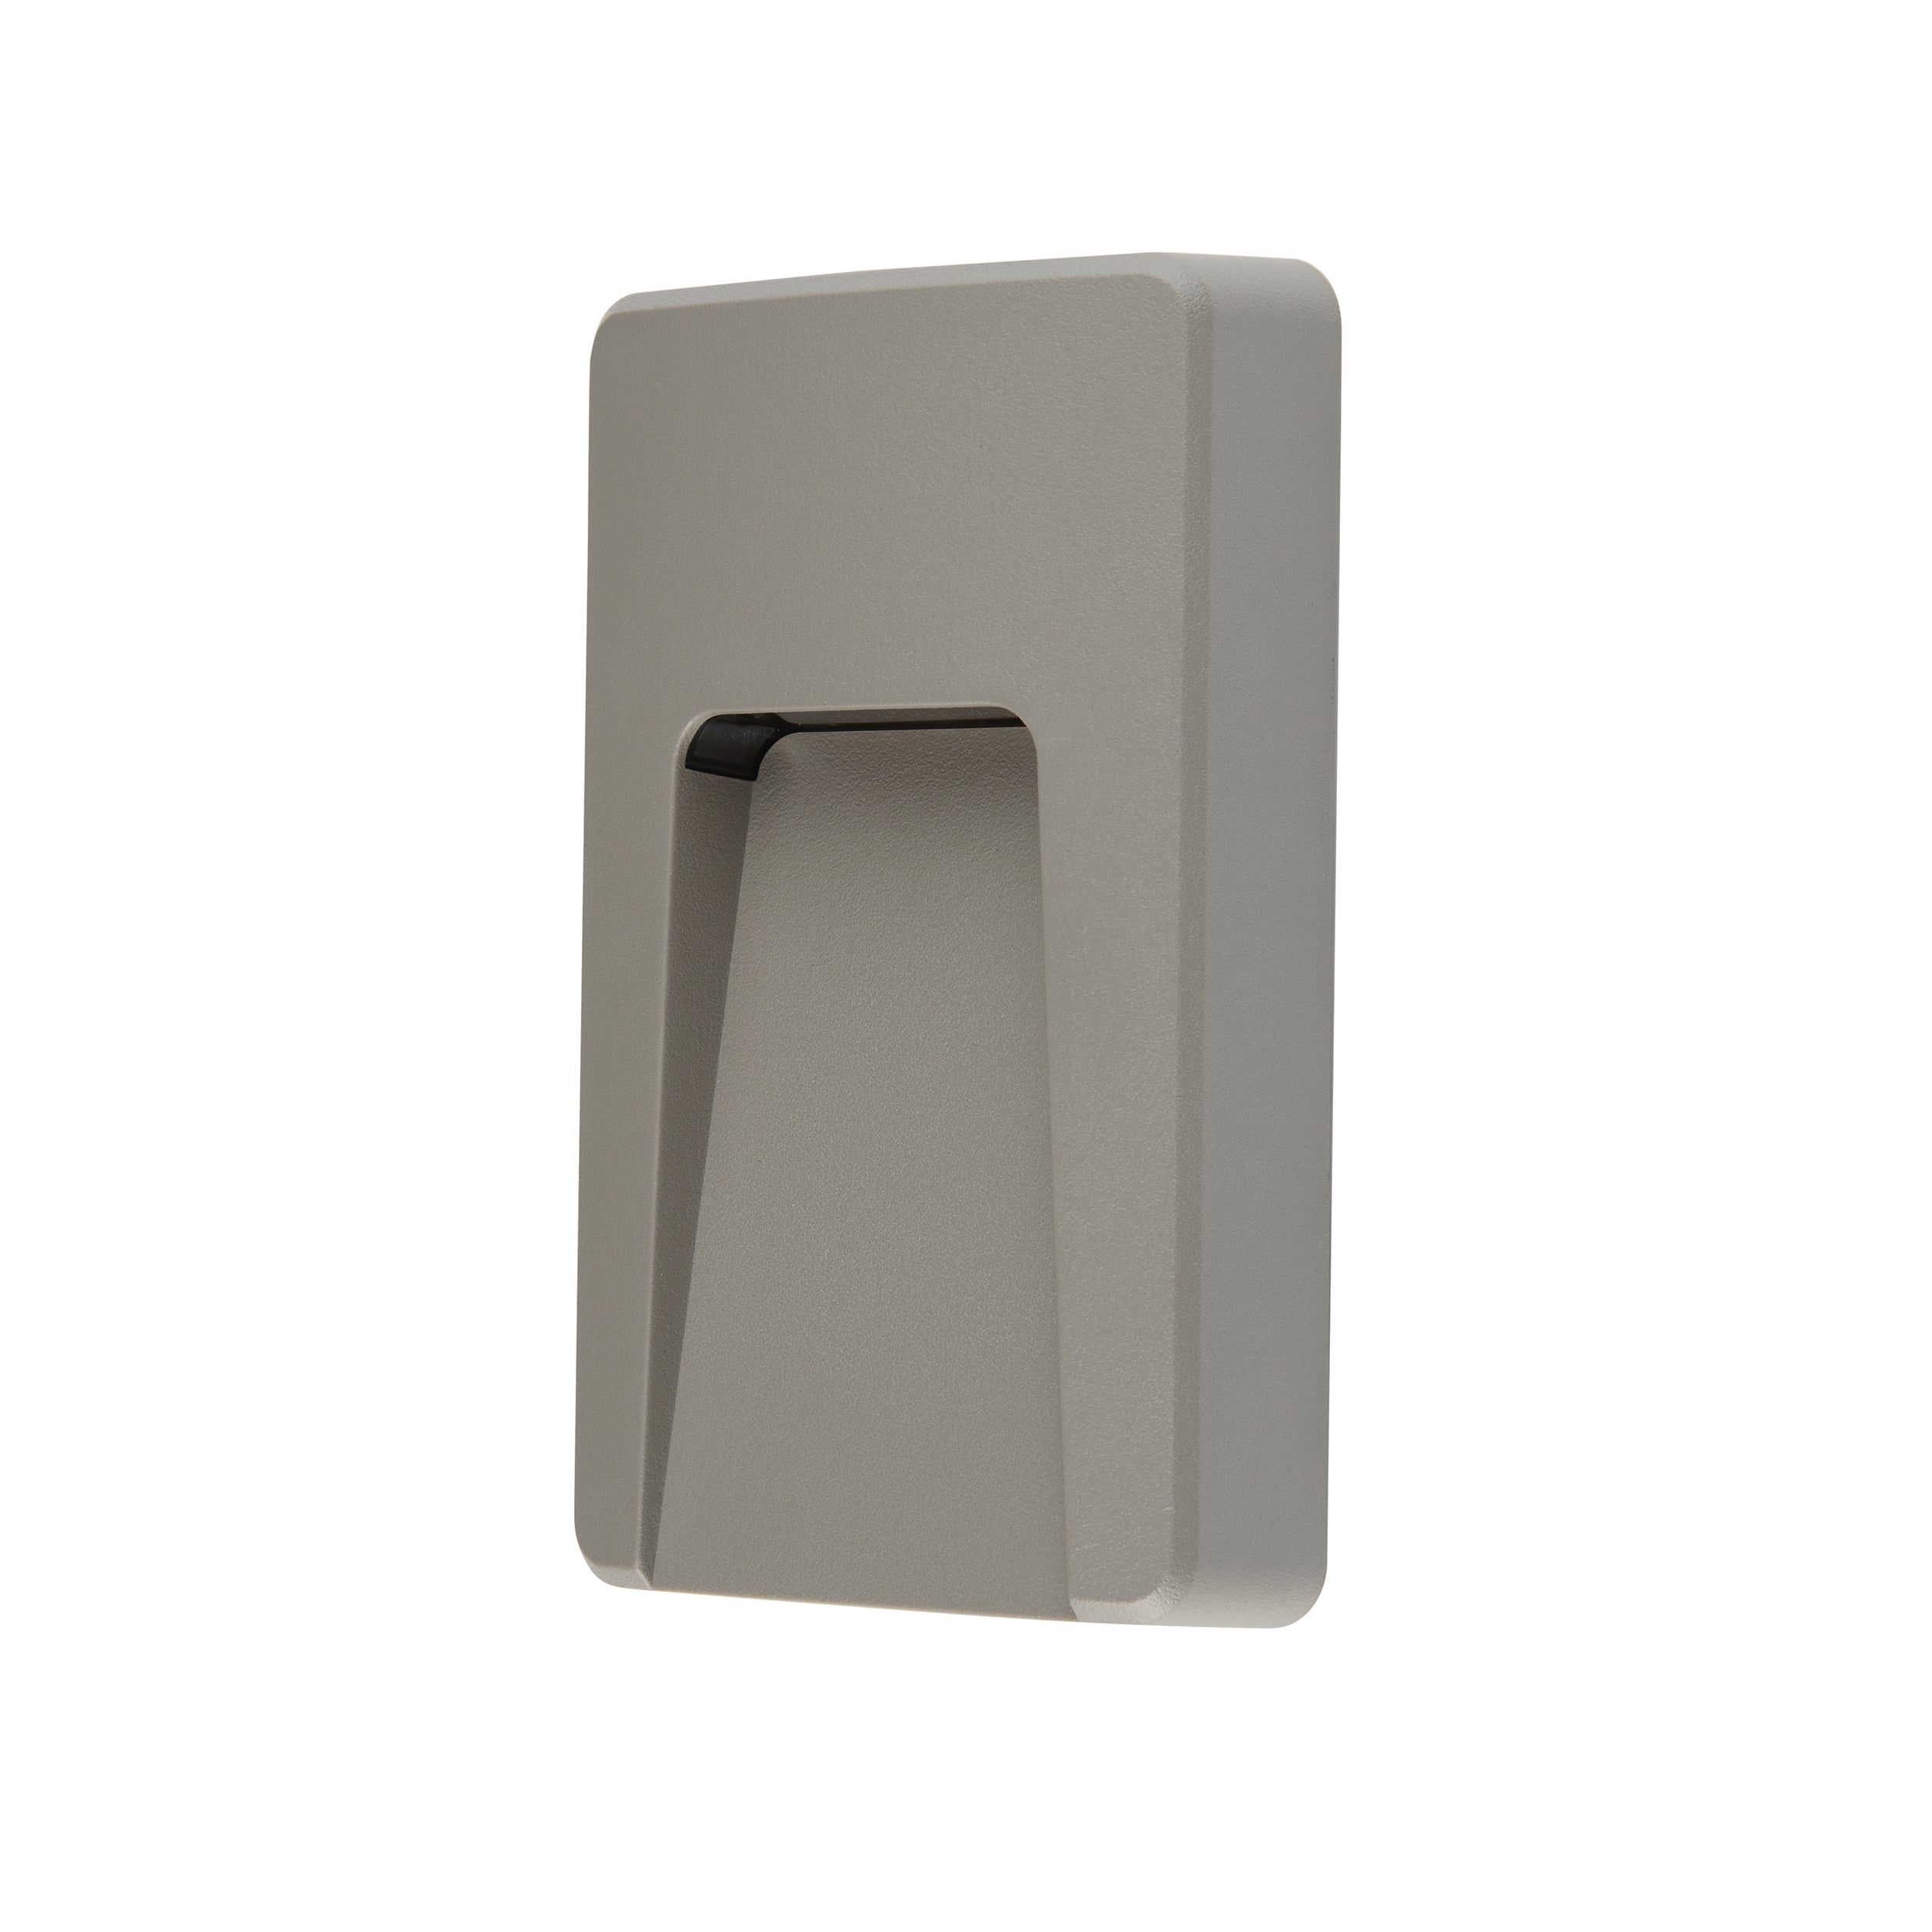 Severus CCT Vertical Indirect Guide Light IP65 2.8W